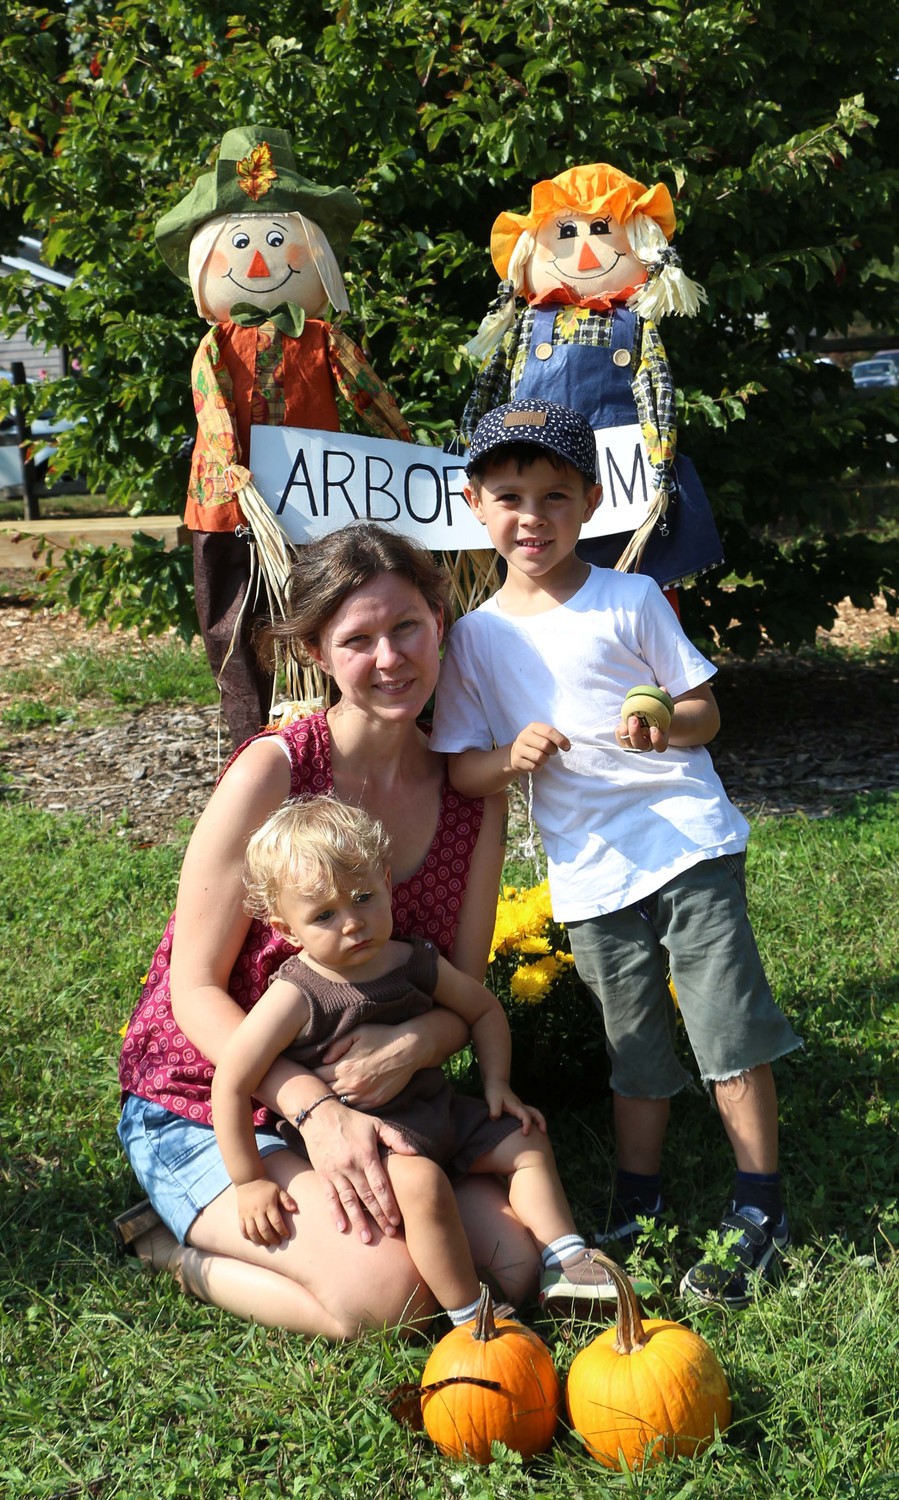 Leigh Augustine enjoyed a day in the pumpkin garden with her sons Asa, 5, and Forrest, 1.